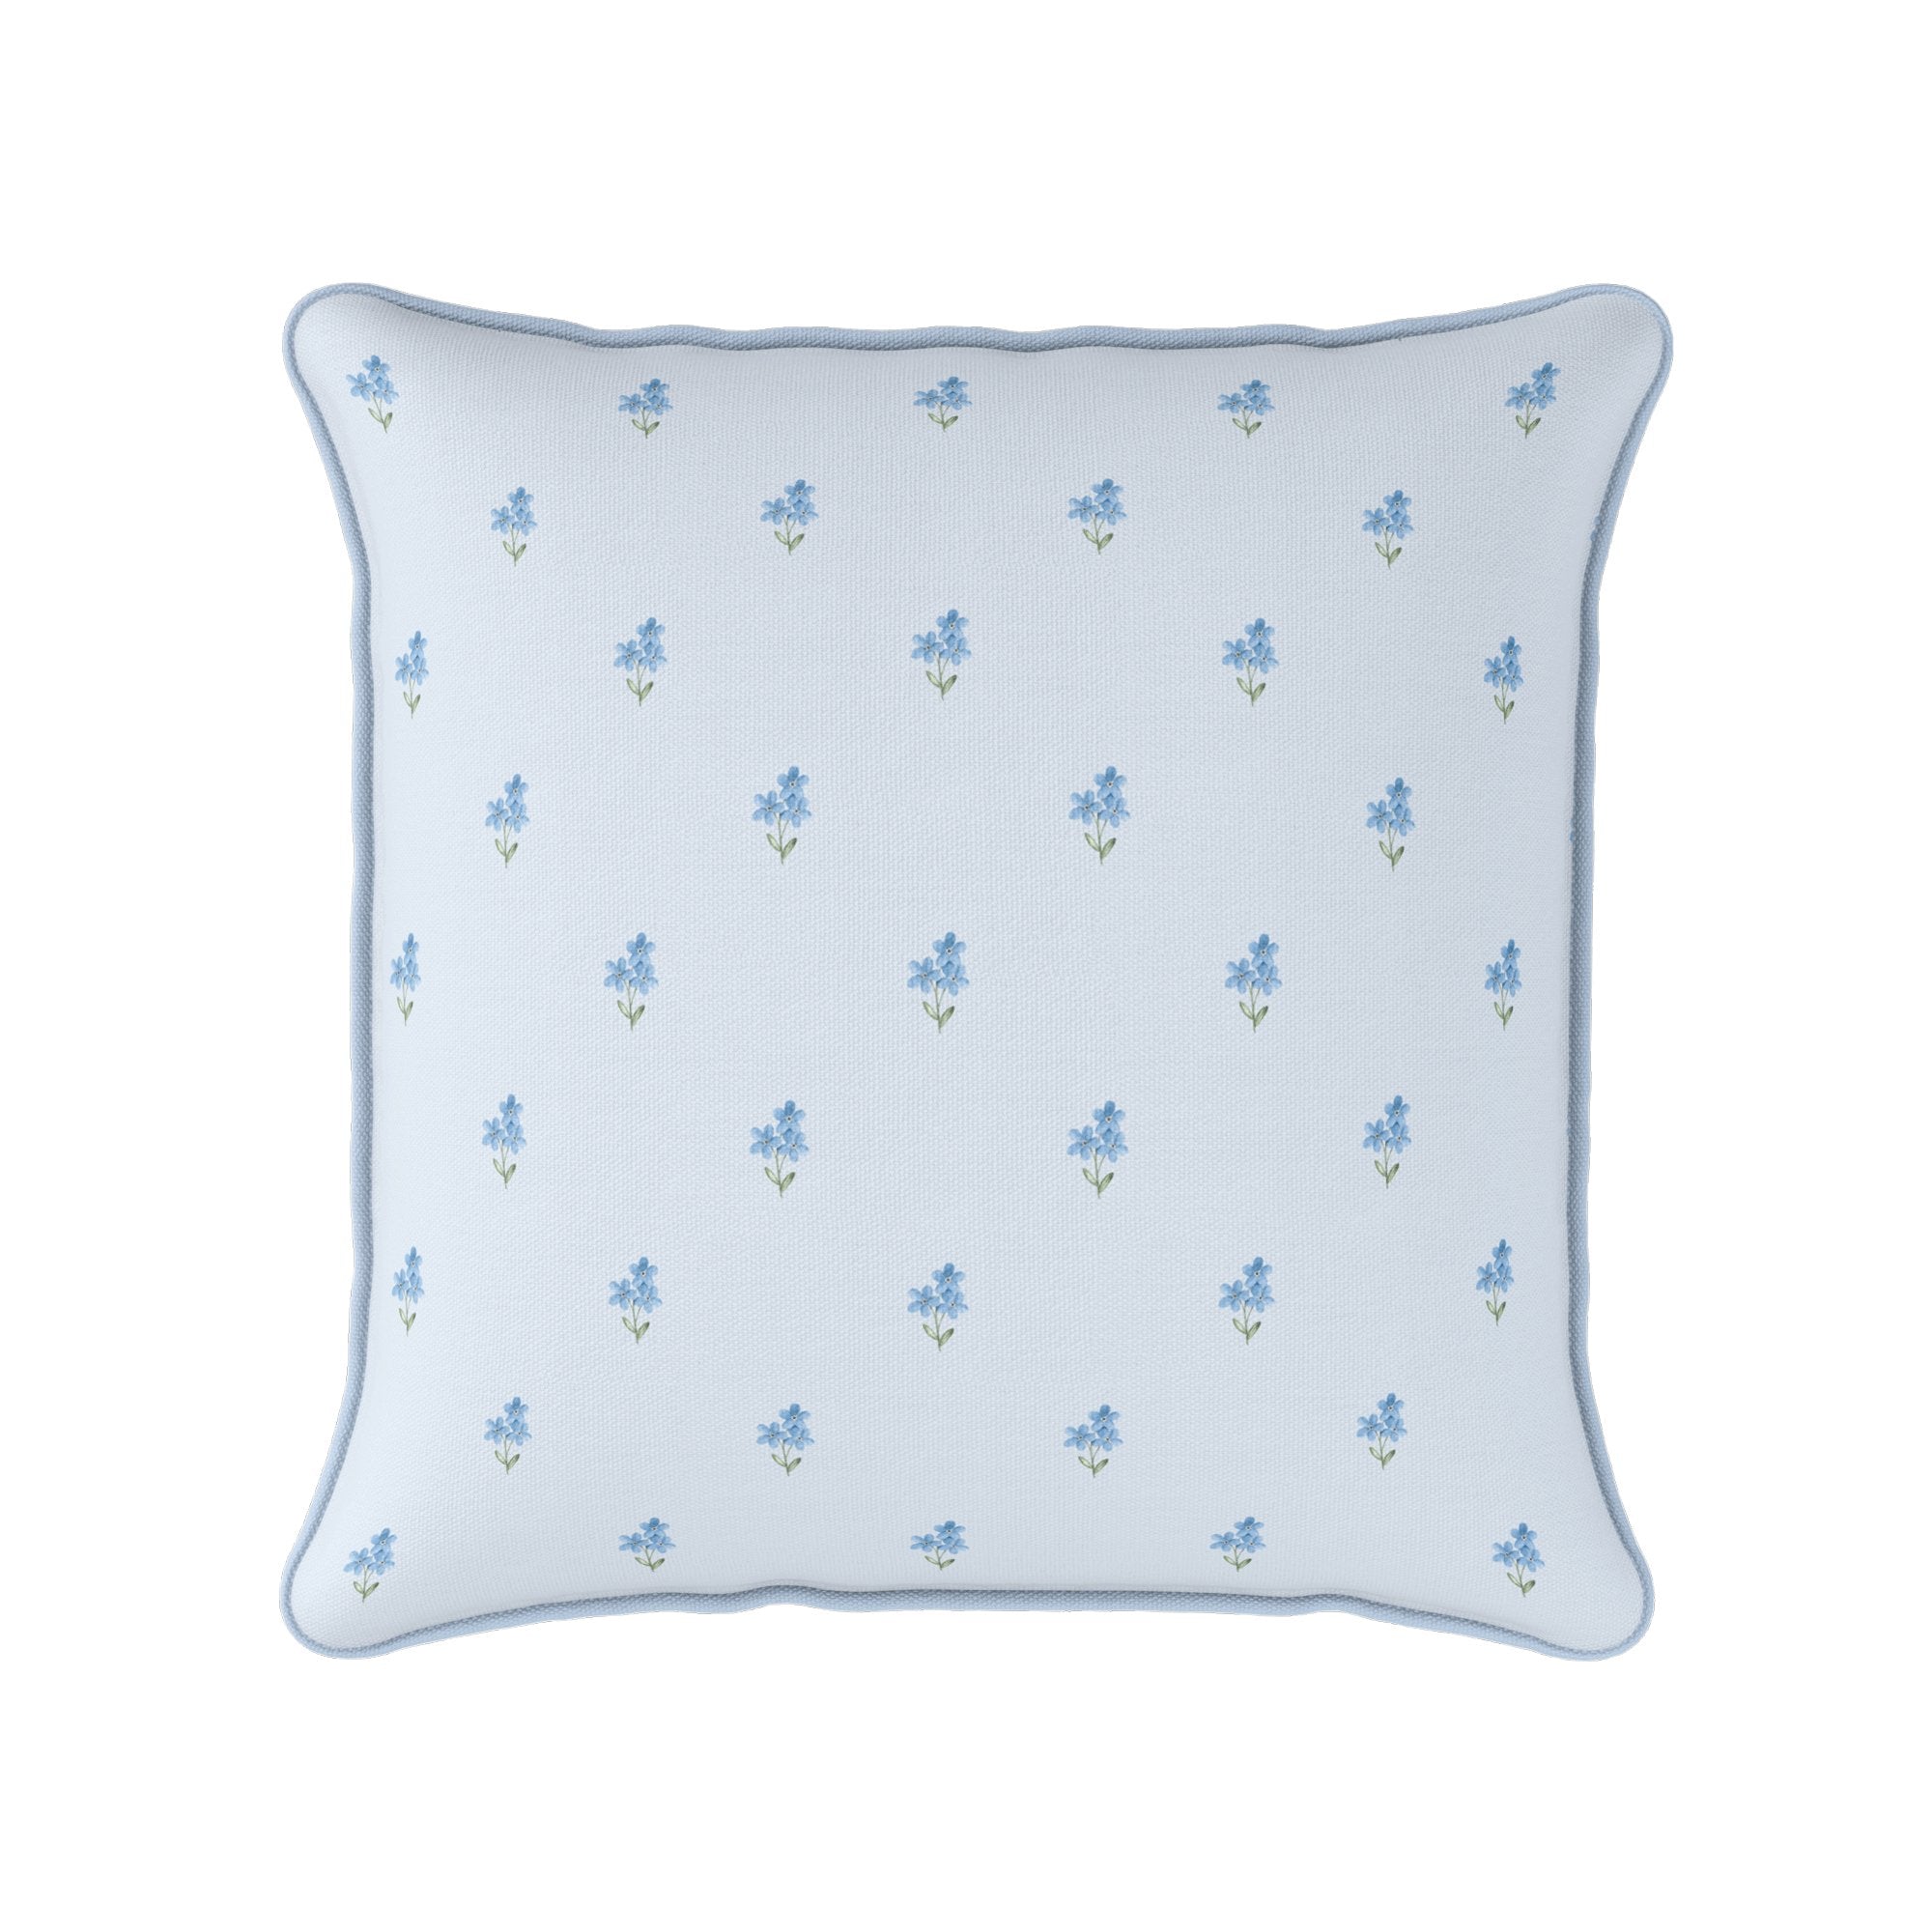 Forget Me Not Cushion - Serenity - Hydrangea Lane Home